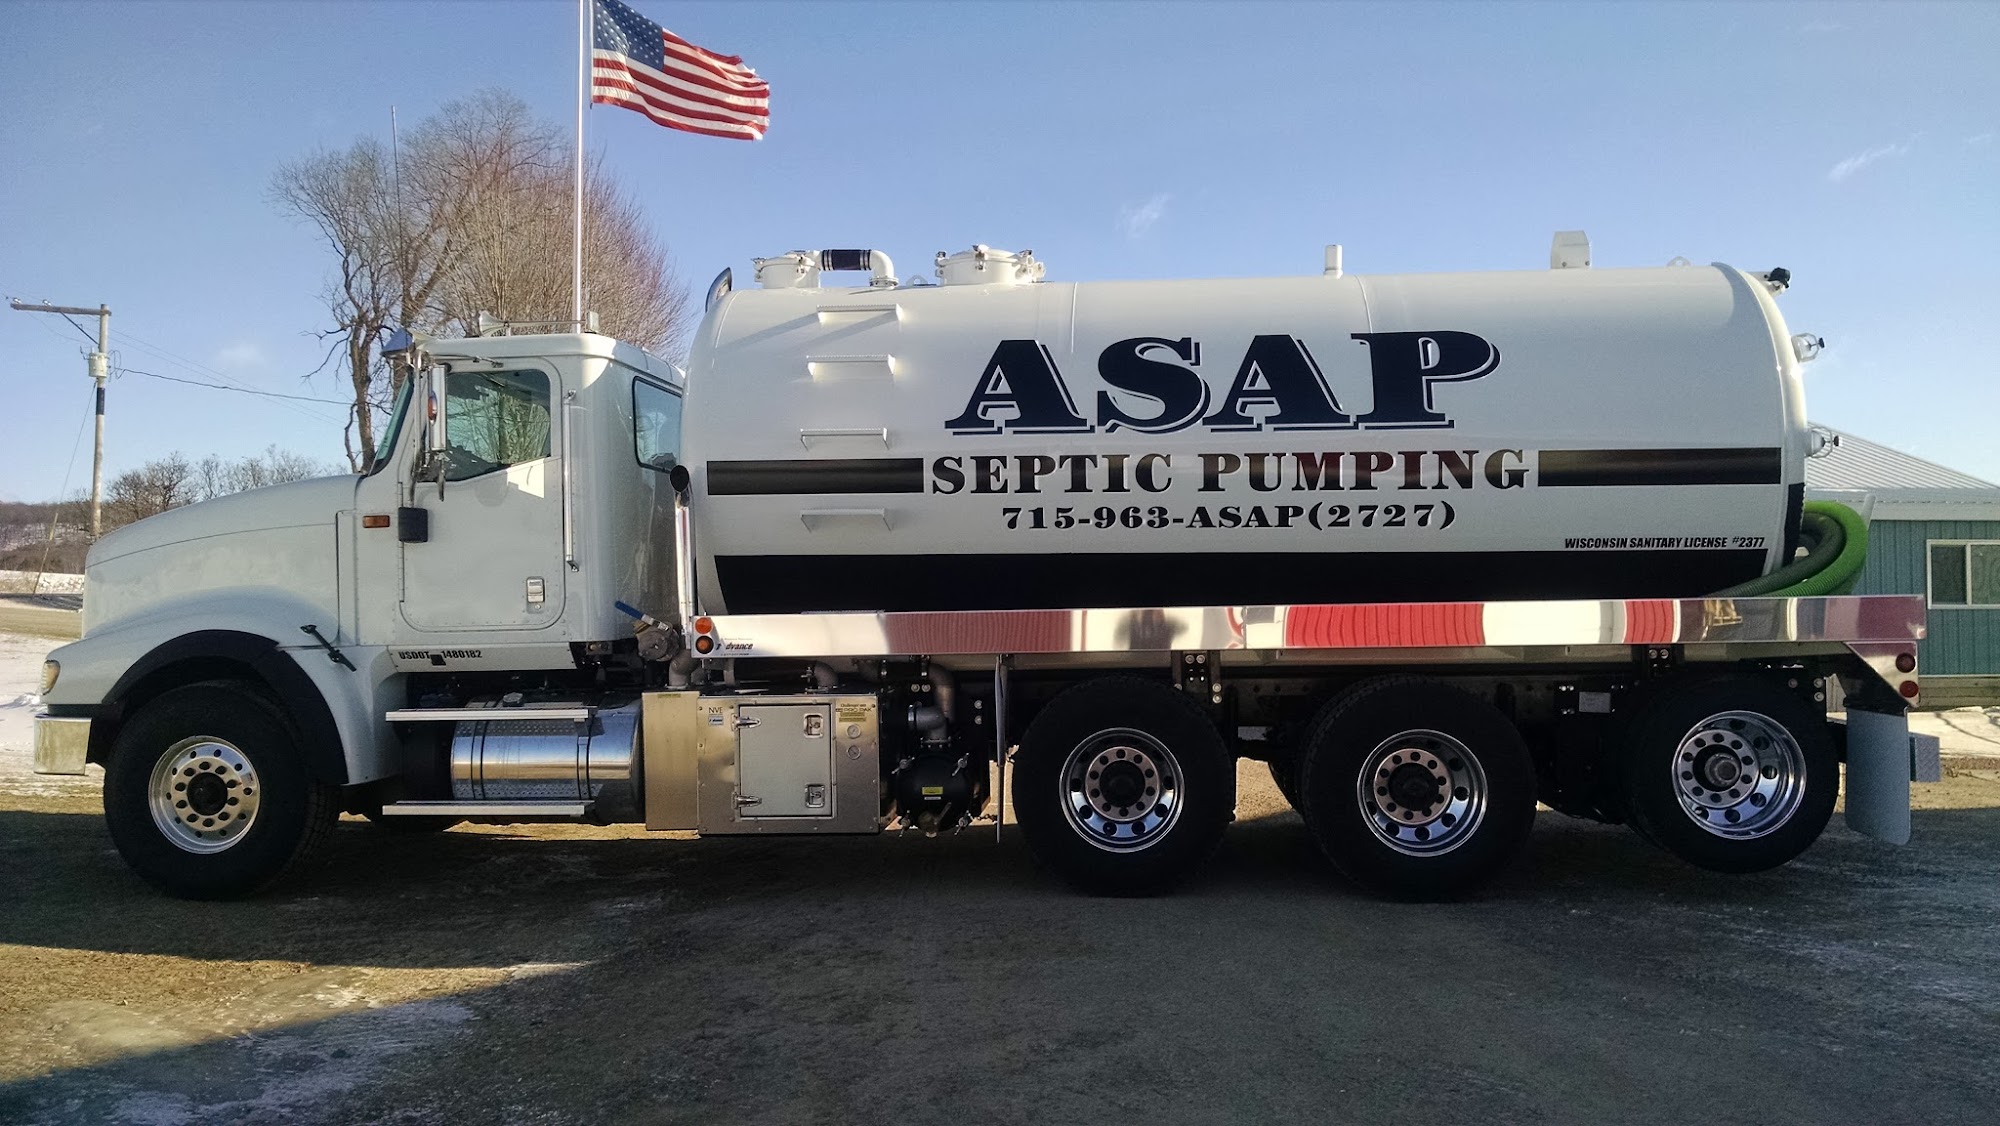 ASAP Septic Pumping N9404 WI-95, Alma Center Wisconsin 54611